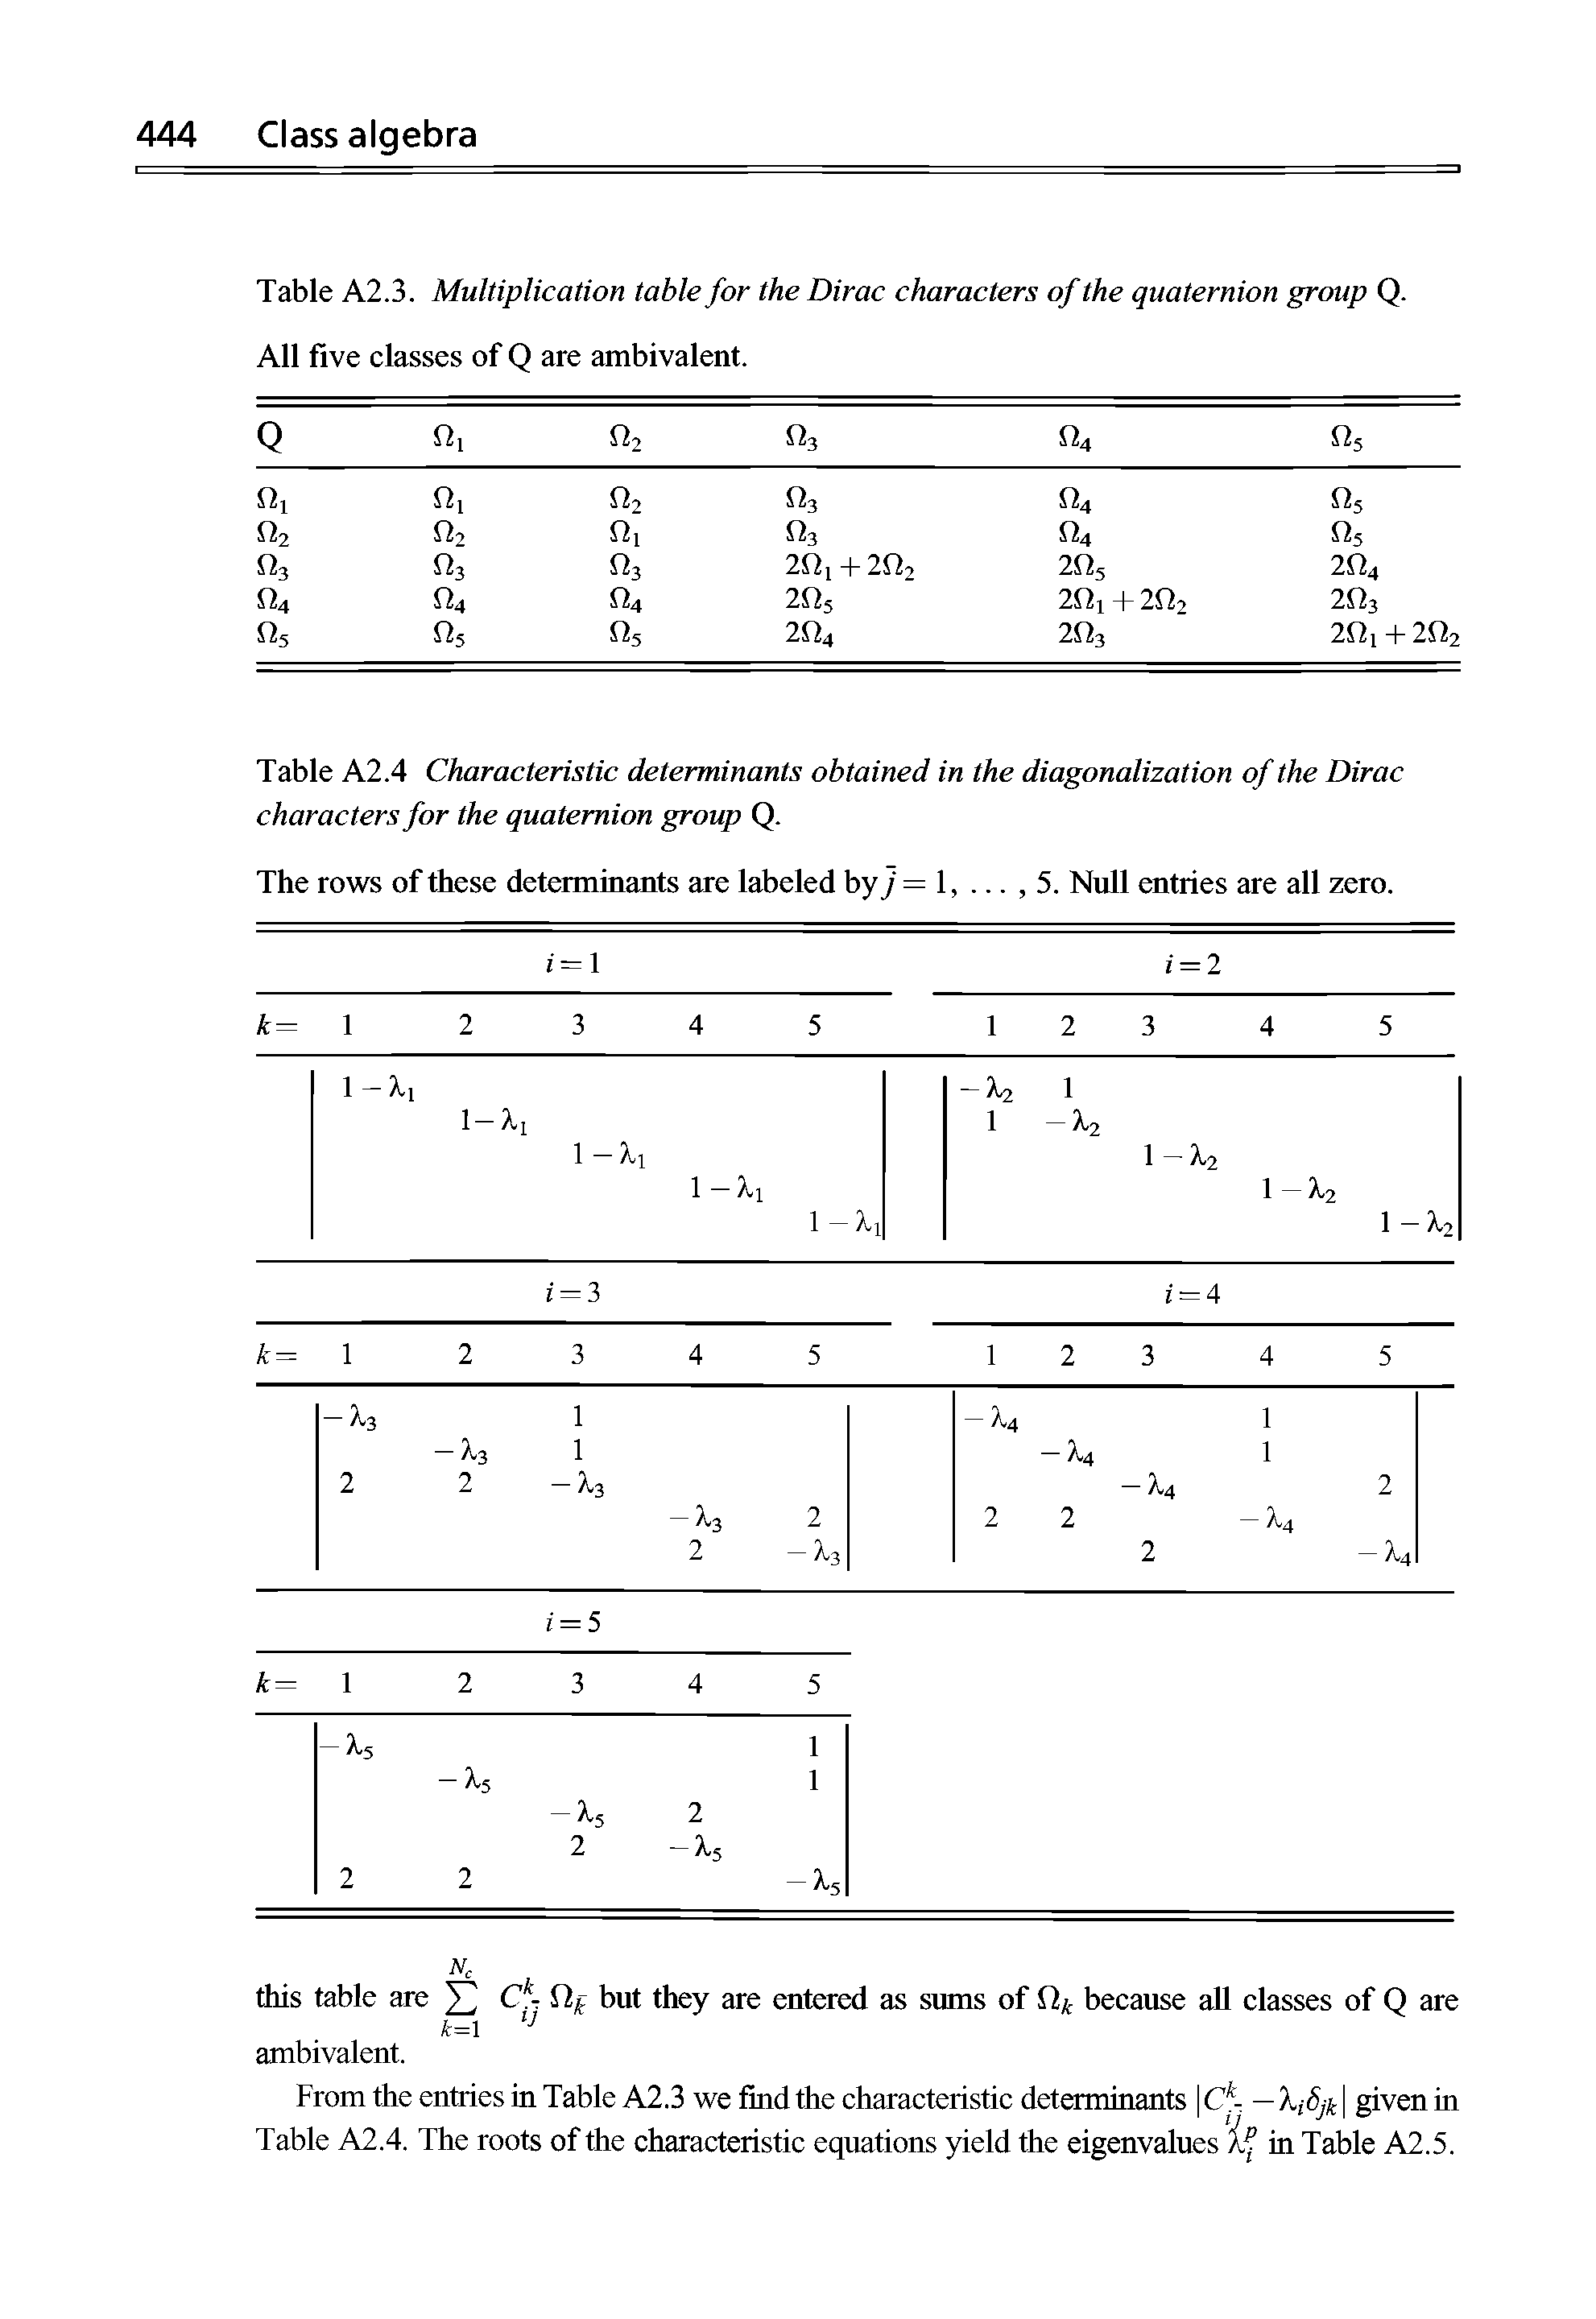 Table A2.3. Multiplication table for the Dirac characters of the quaternion group Q.